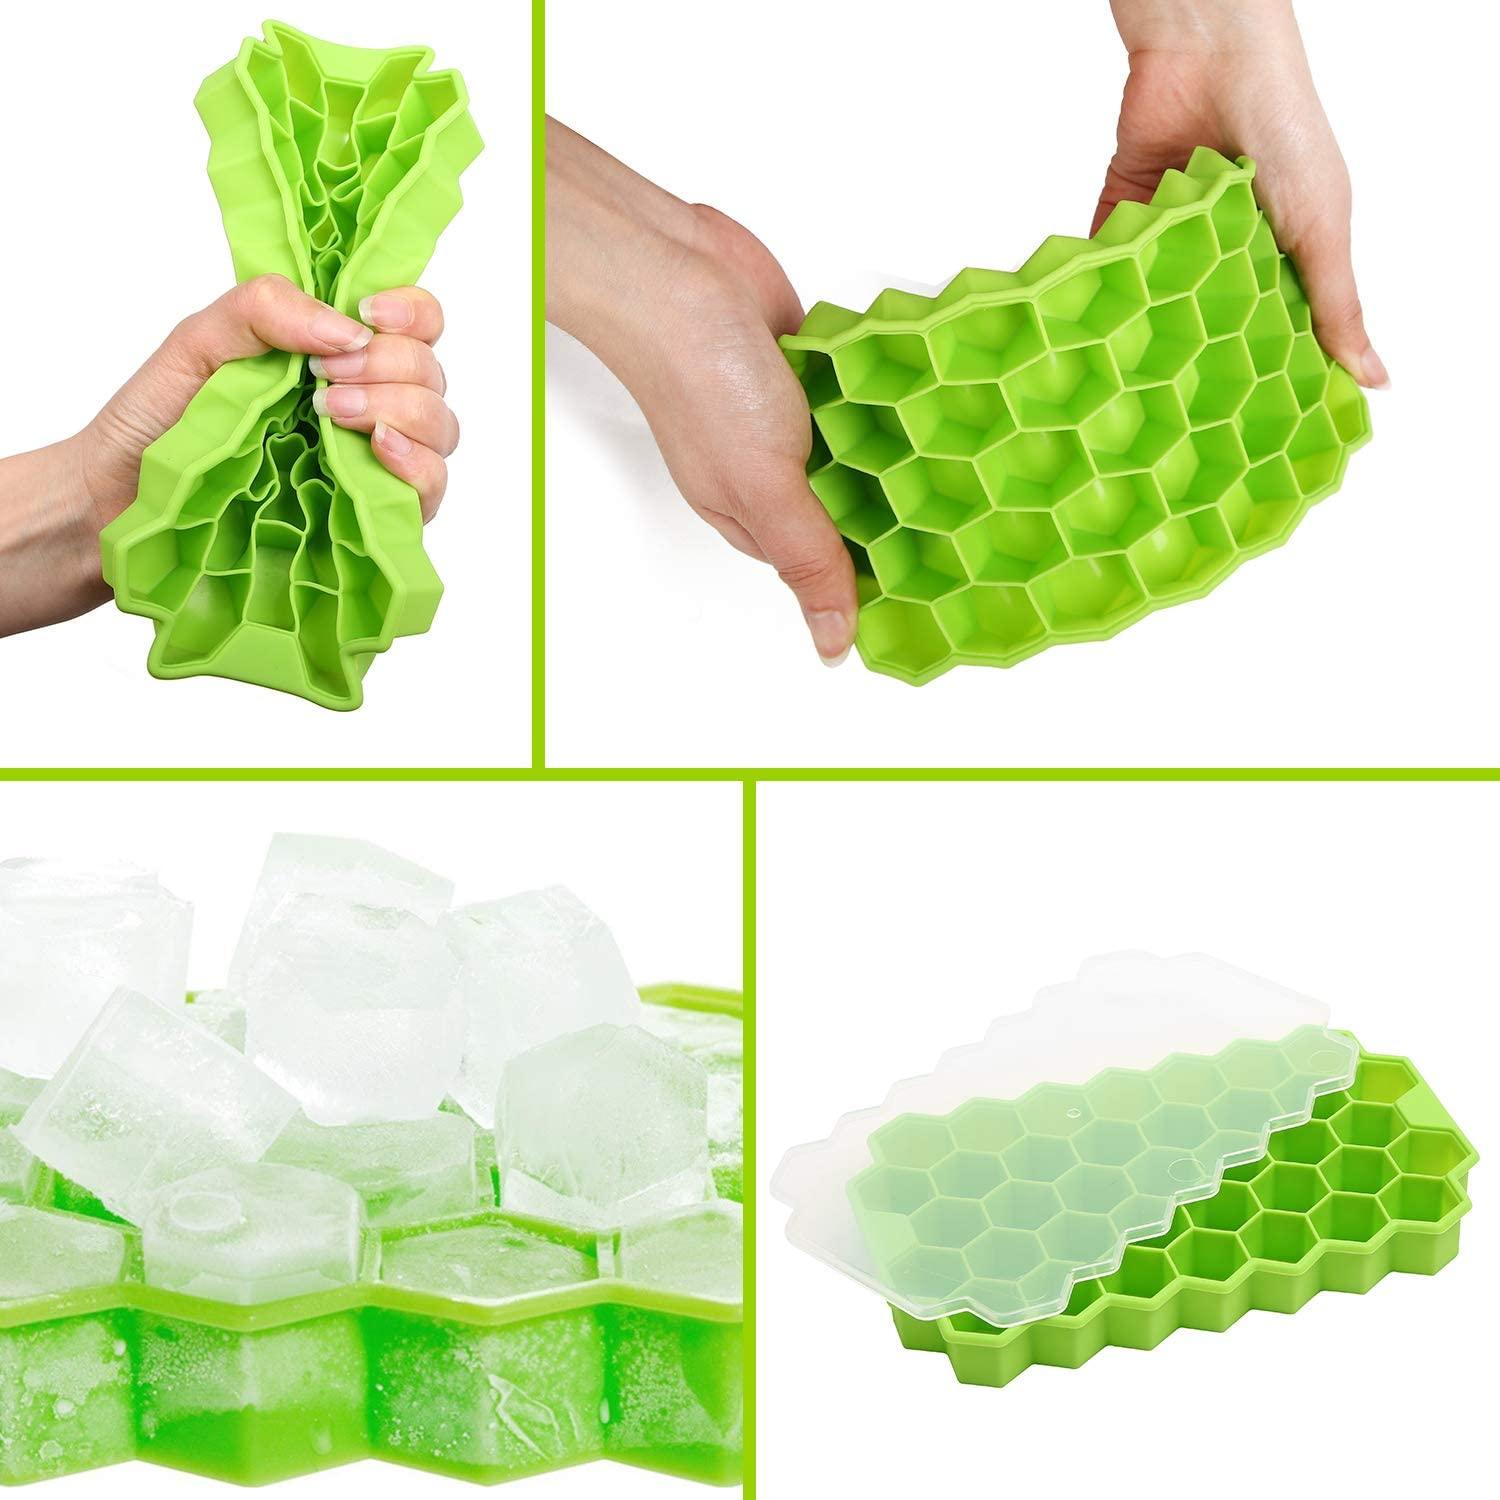 Ice Cube Trays with Lids 2-Pack - Woosir